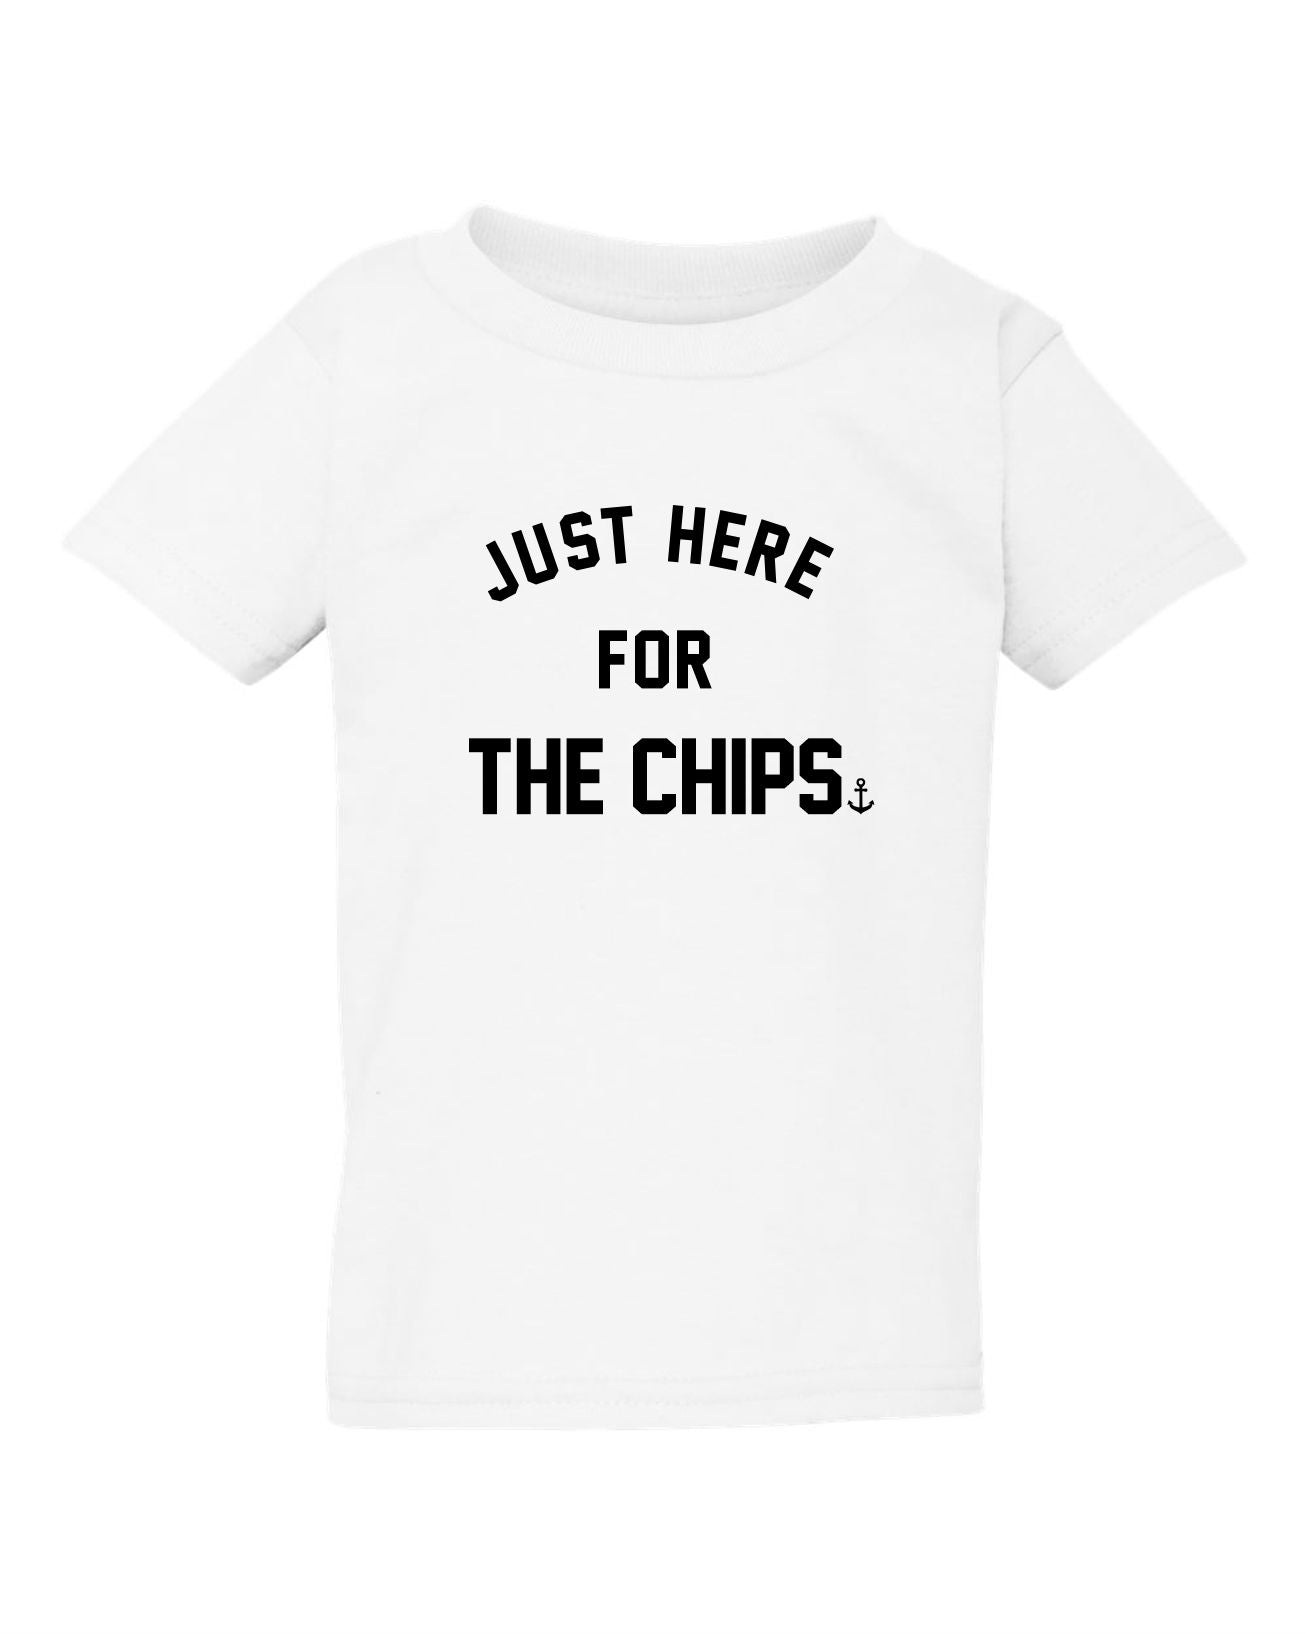 "Just Here For The Chips" Toddler/Youth T-Shirt